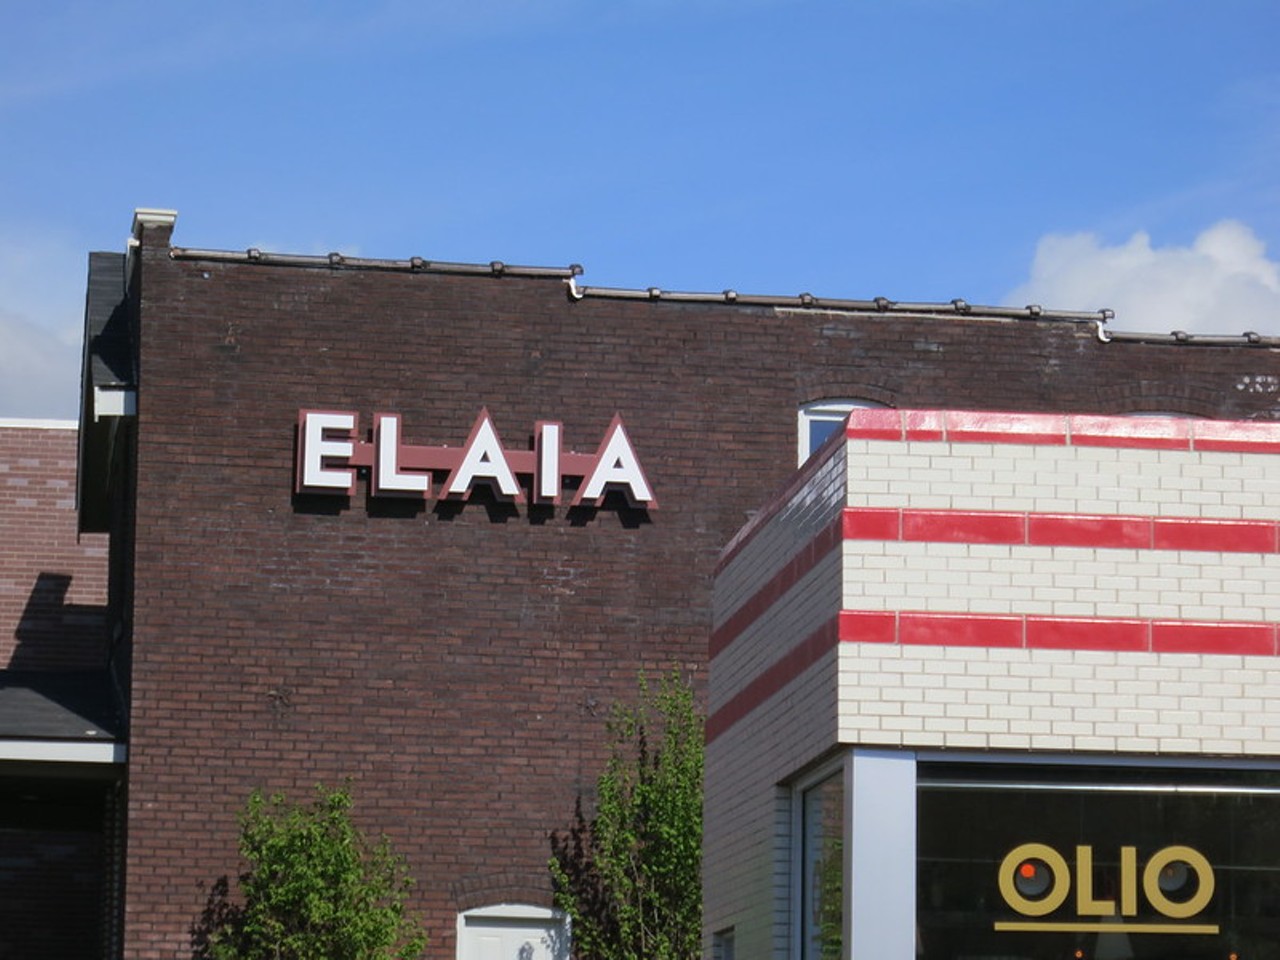 Elaia
(1634 Tower Grove Avenue, 314-932-1088)
Elaia, twin to restaurant Olio, is part of Ben Poremba's  Bengelina Hospitality Group. Unvaccinated customers will be asked to have a seat outside.
Photo credit: Paul Sableman / Flickr